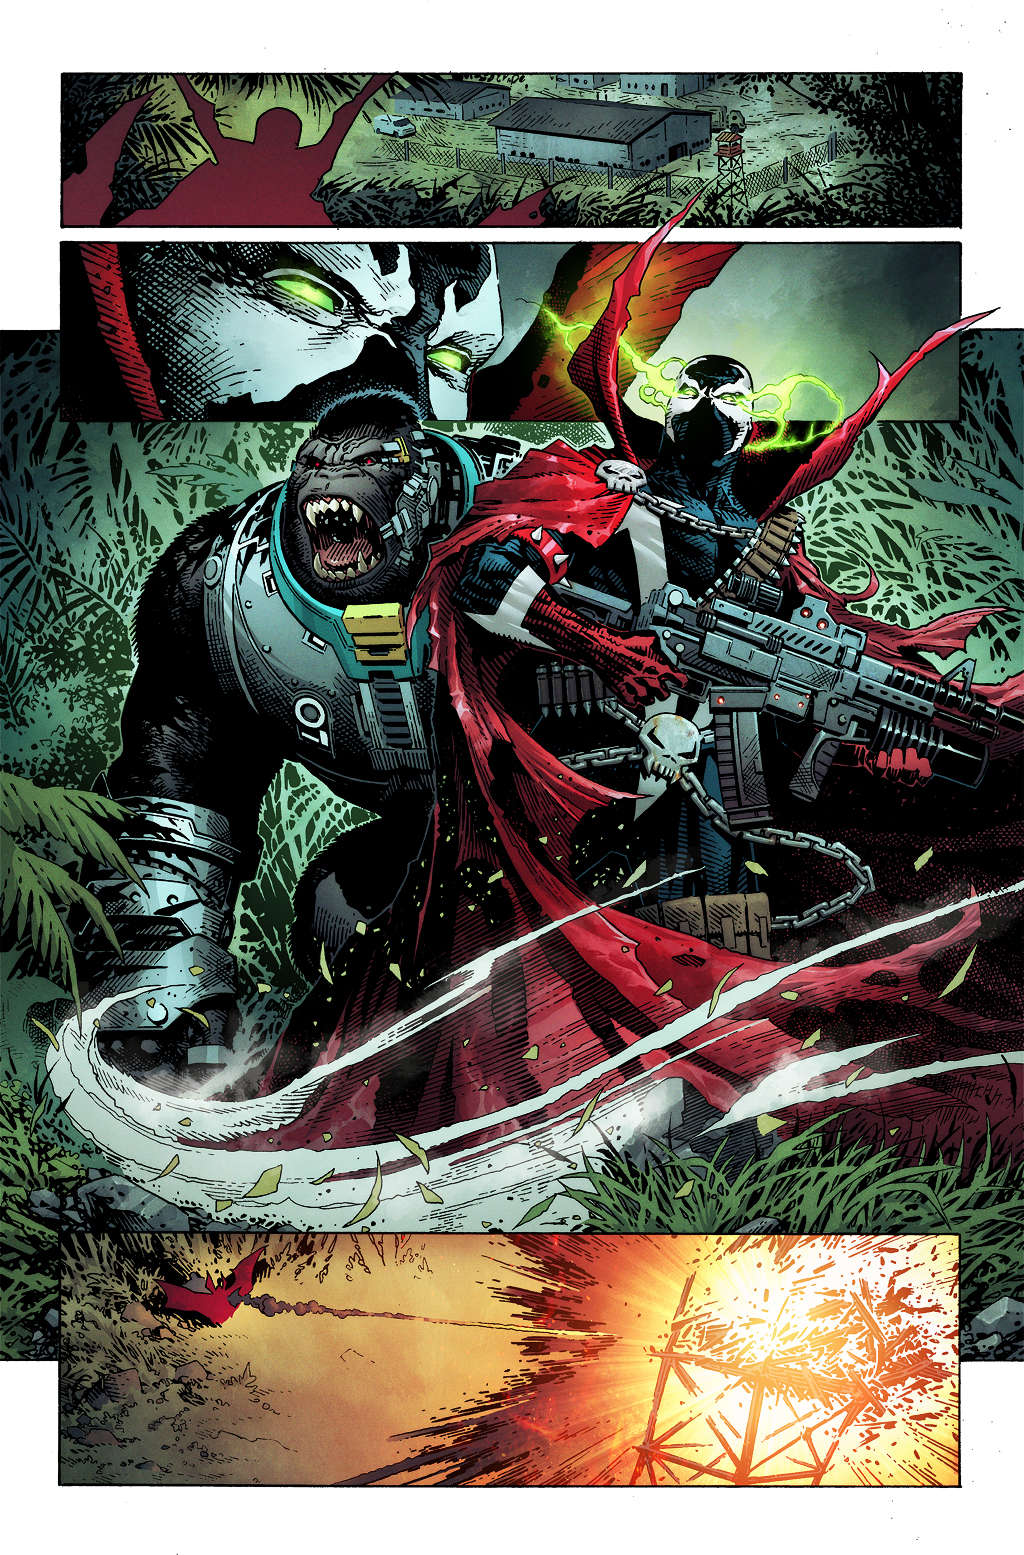 Page from Spawn's Universe #1 by Jim Cheung